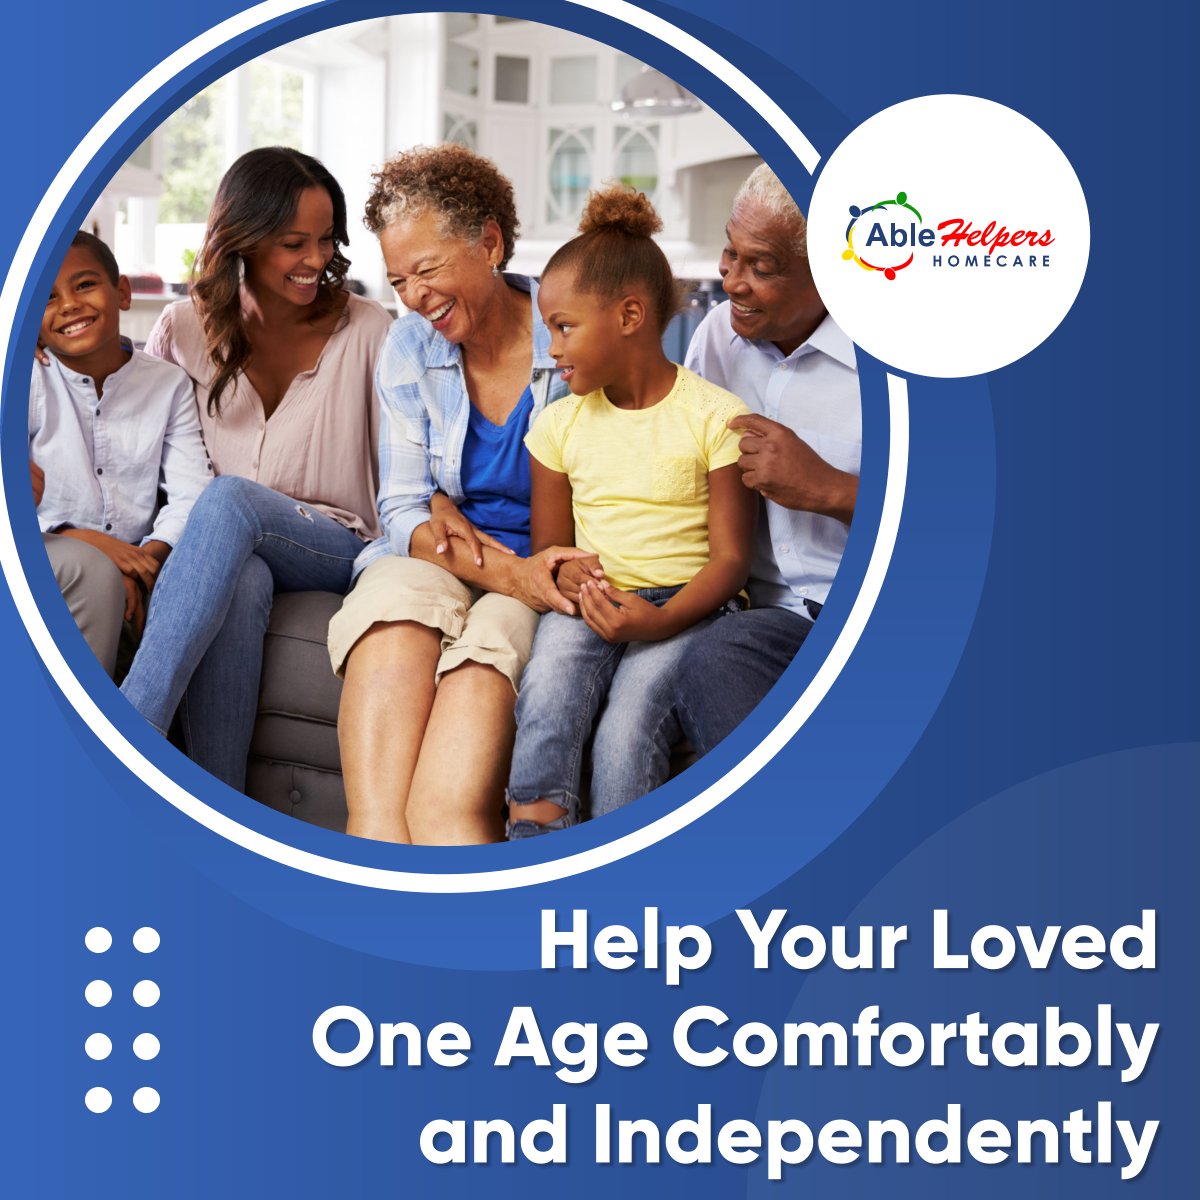 Forbes shares some tips to provide care for our elder family members who wish to age with comfort and independence from their own homes.

Read more: facebook.com/ablehelpershc/…

#LouisvilleKY #Homecare #AgeComfortably #AgeIndependently